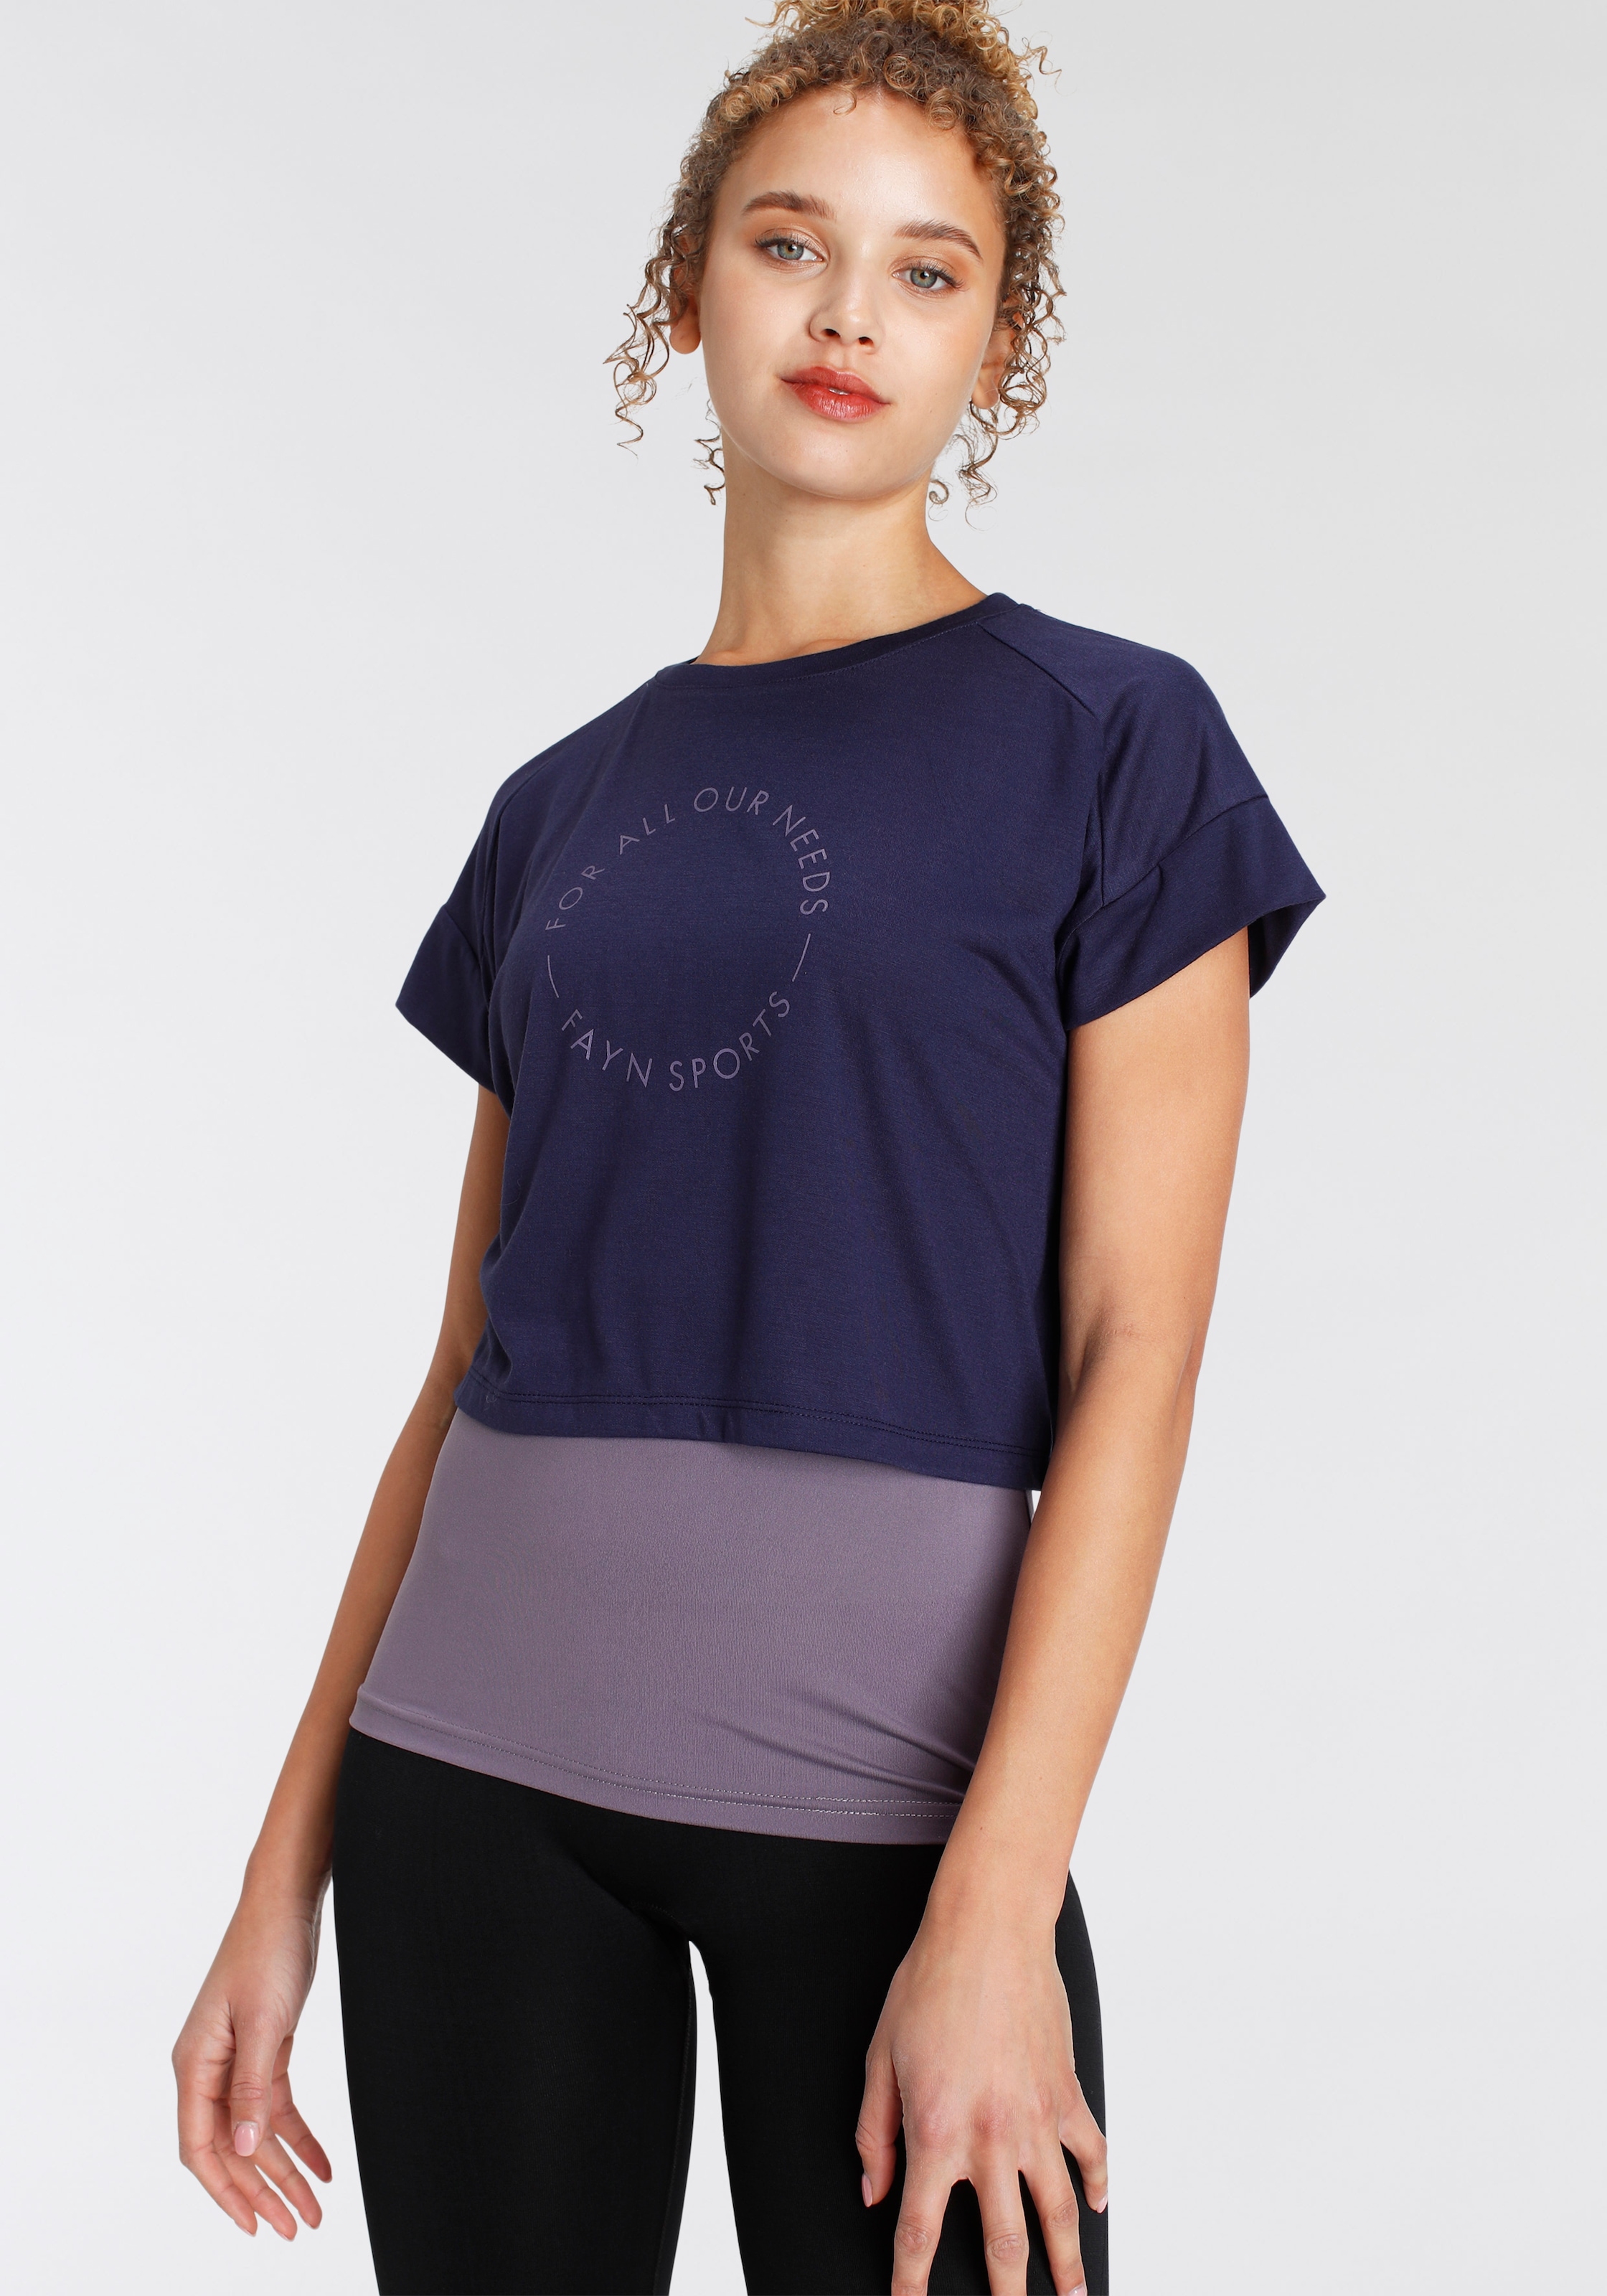 FAYN SPORTS T-Shirt »Cropped Top«, (Set, 2 tlg.) bei ♕